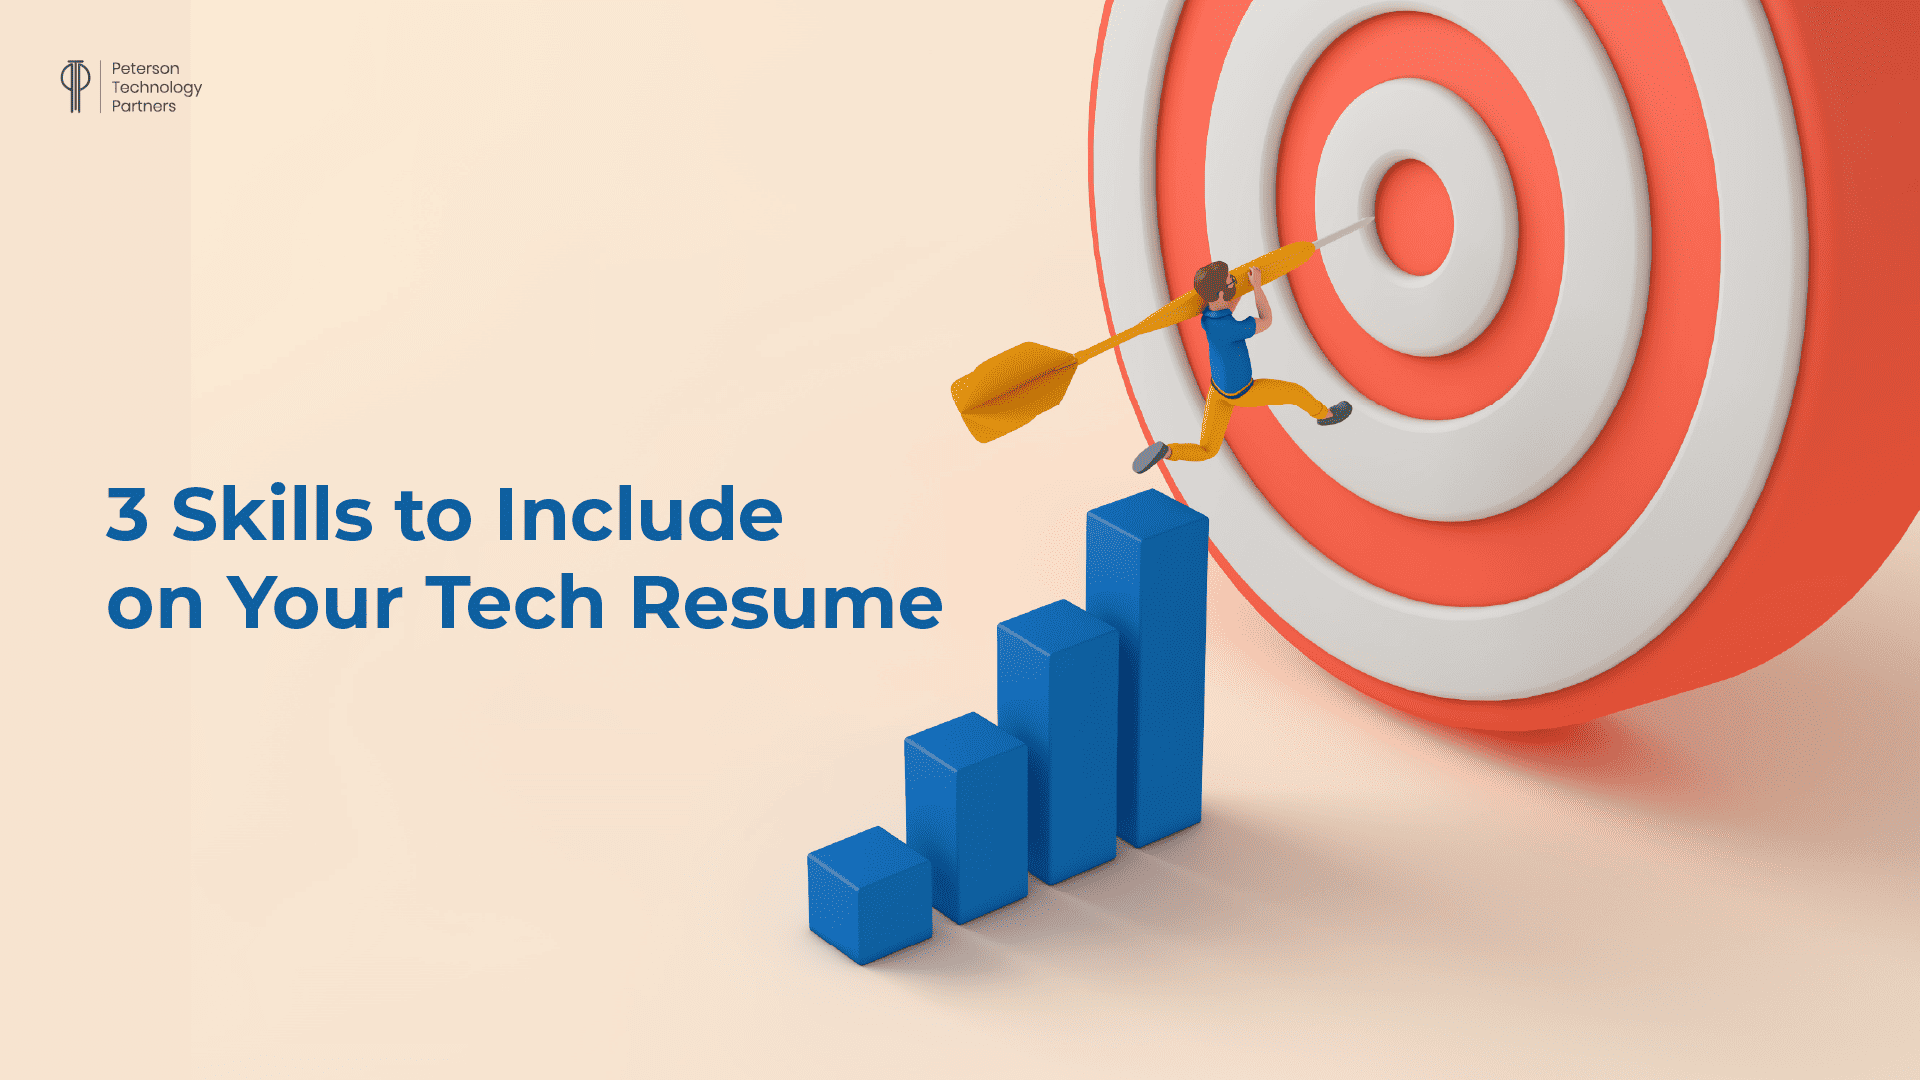 3 Skills to Include on Your Tech Resume